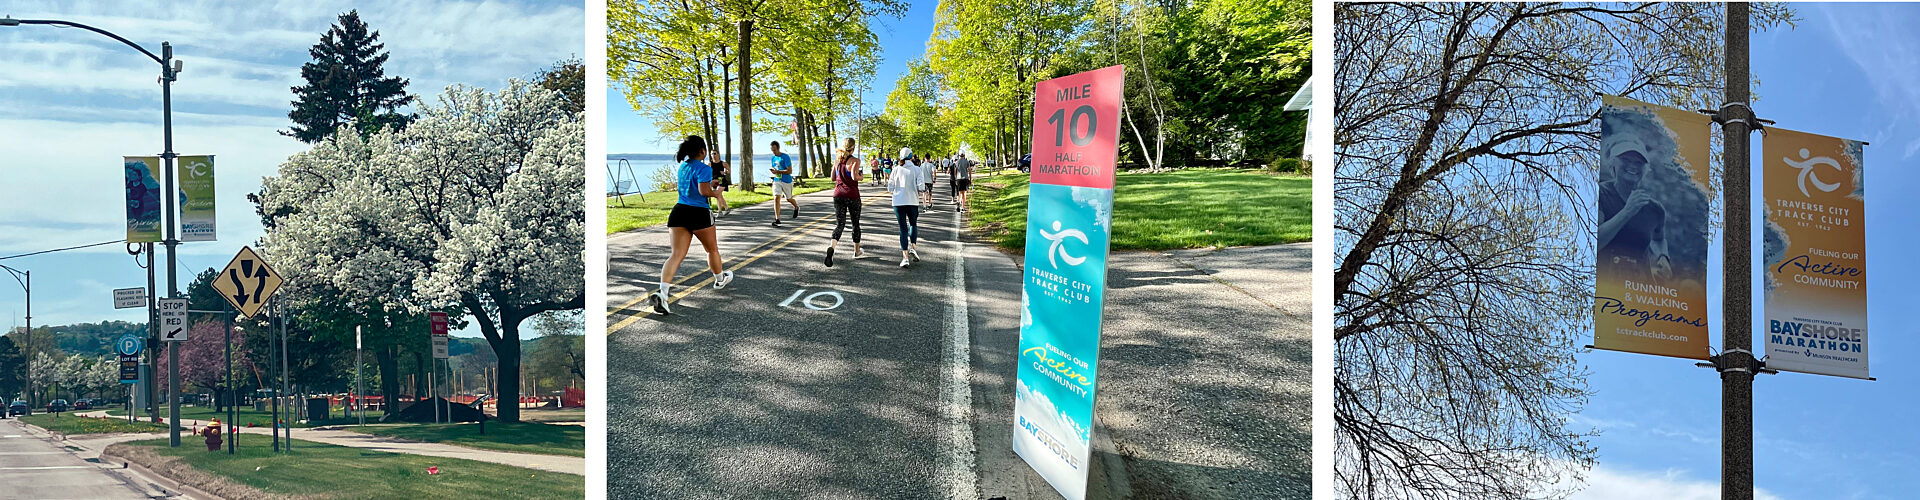 Several light pole bannes and one mile marker banner for the Bayshore Marathon